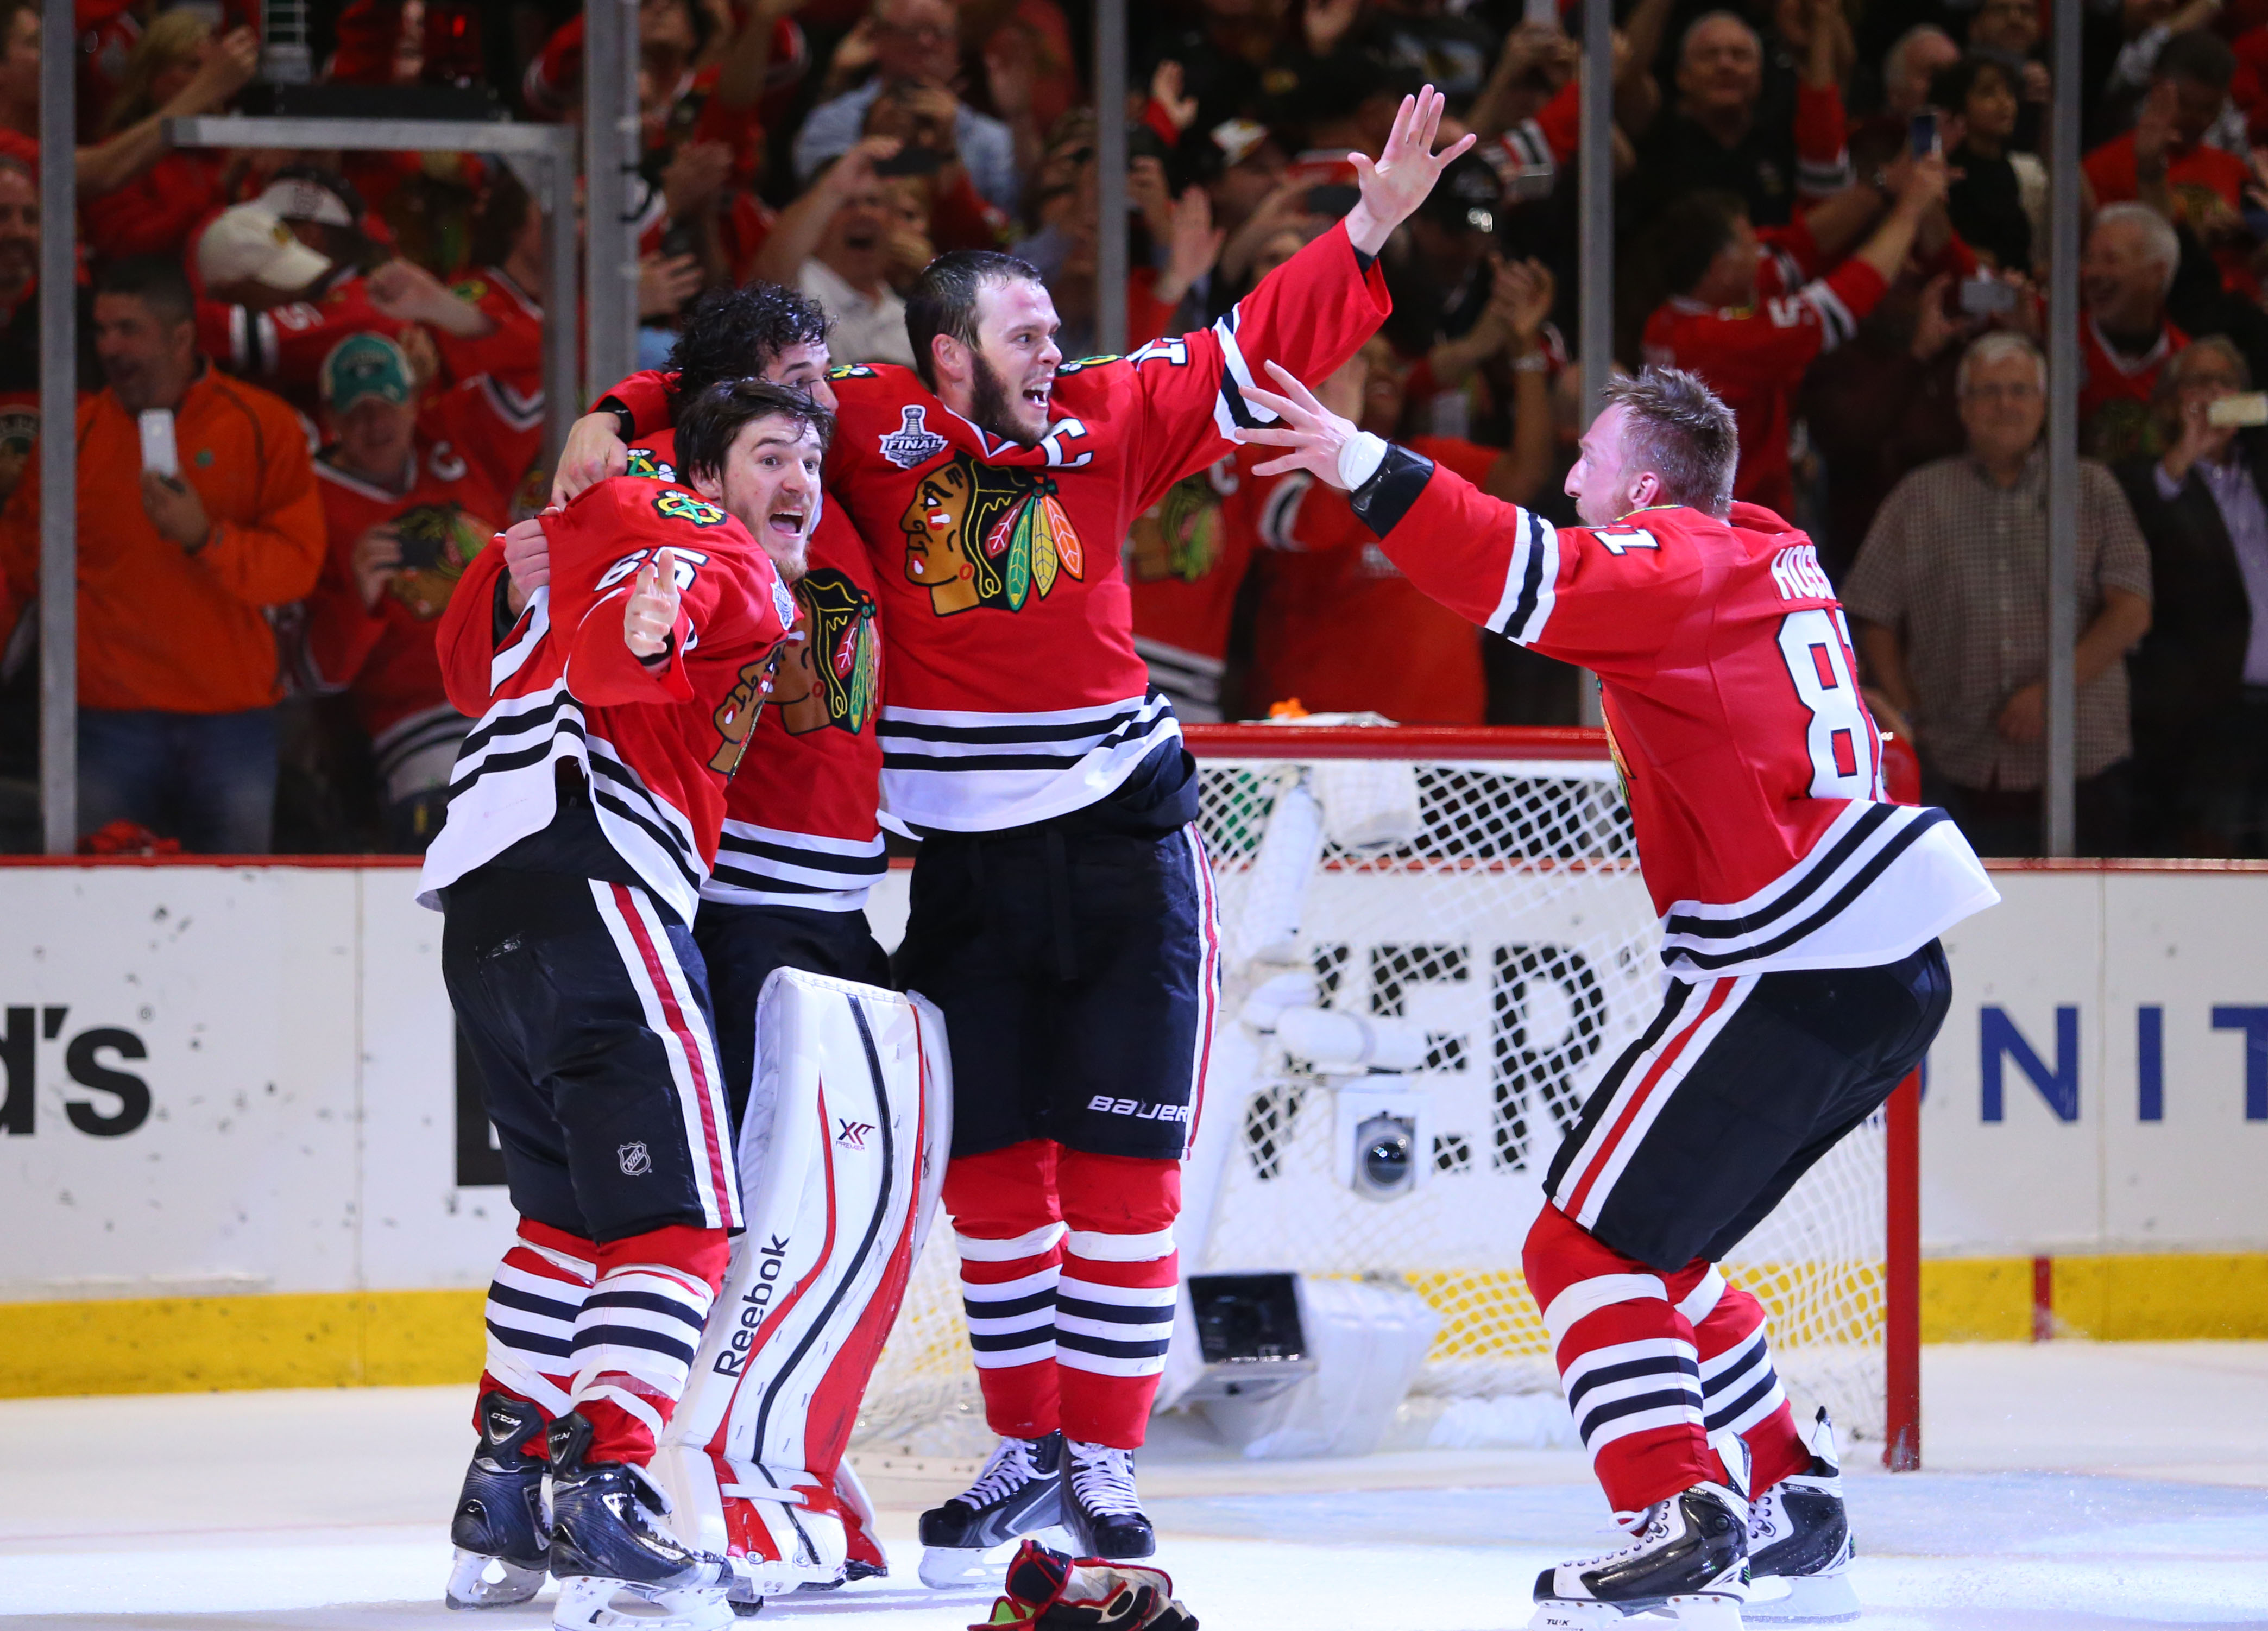 Blackhawks win Game 7, advance to Stanley Cup Finals